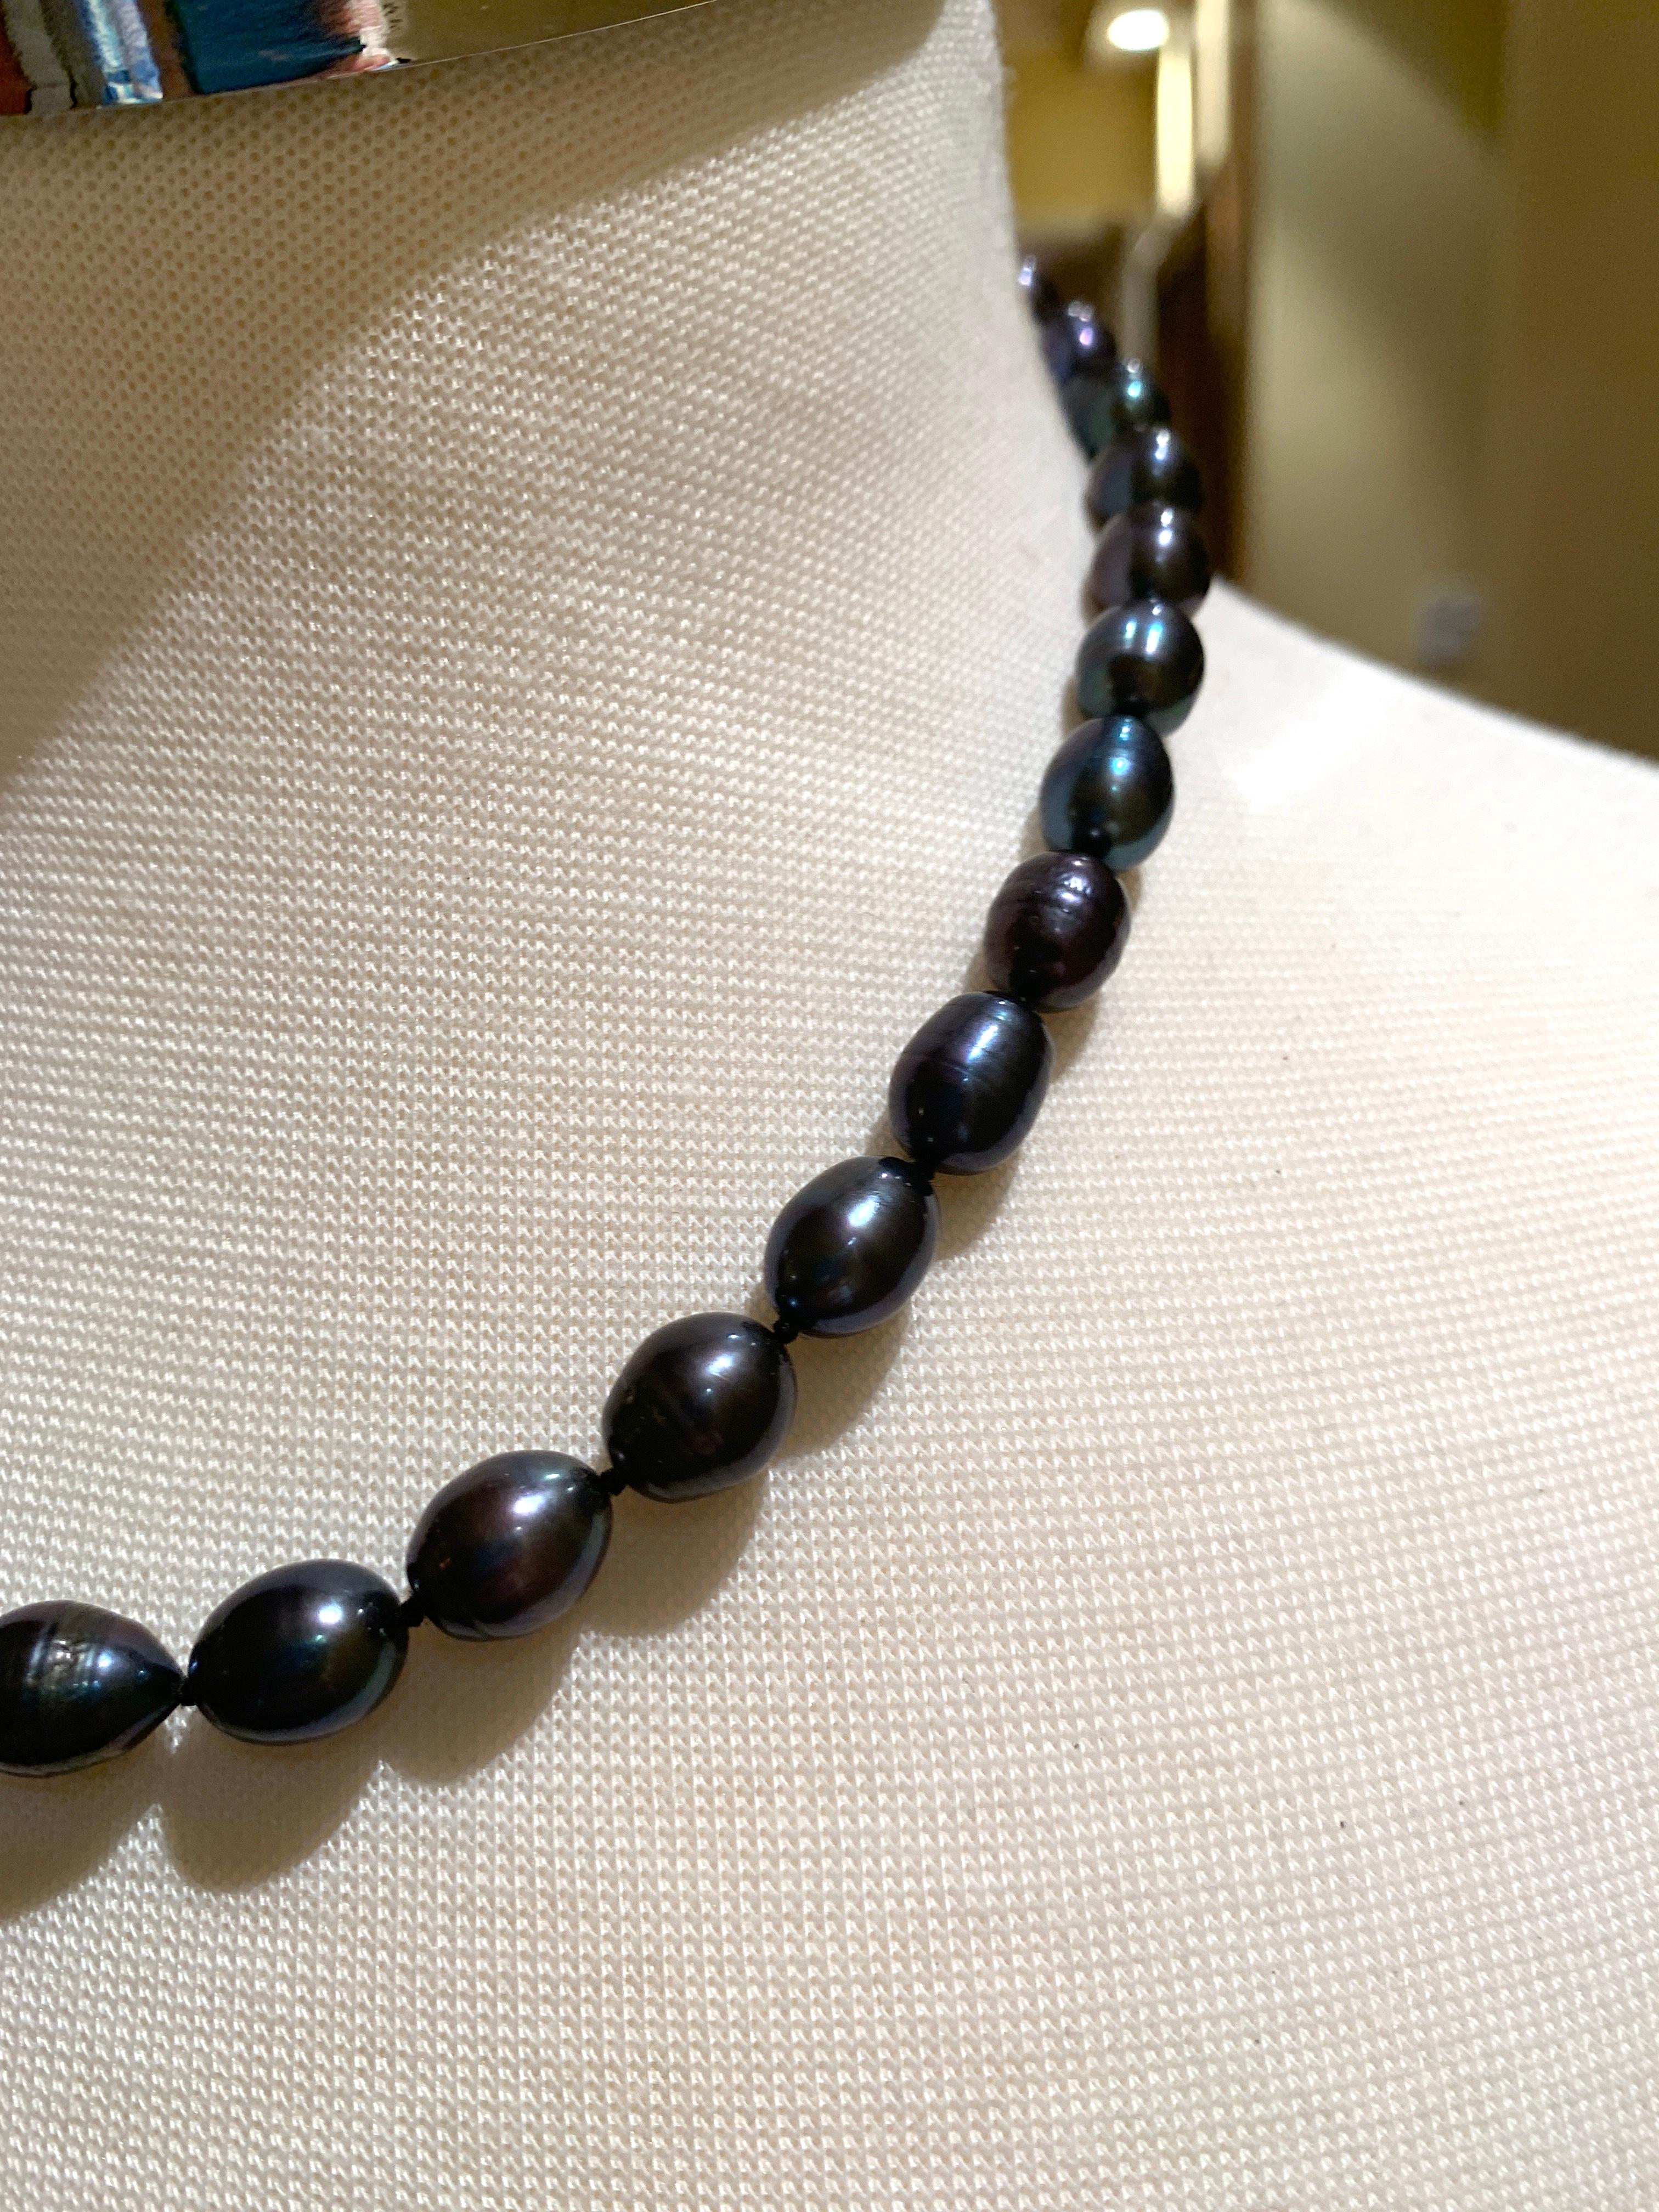 baroque freshwater pearl necklace